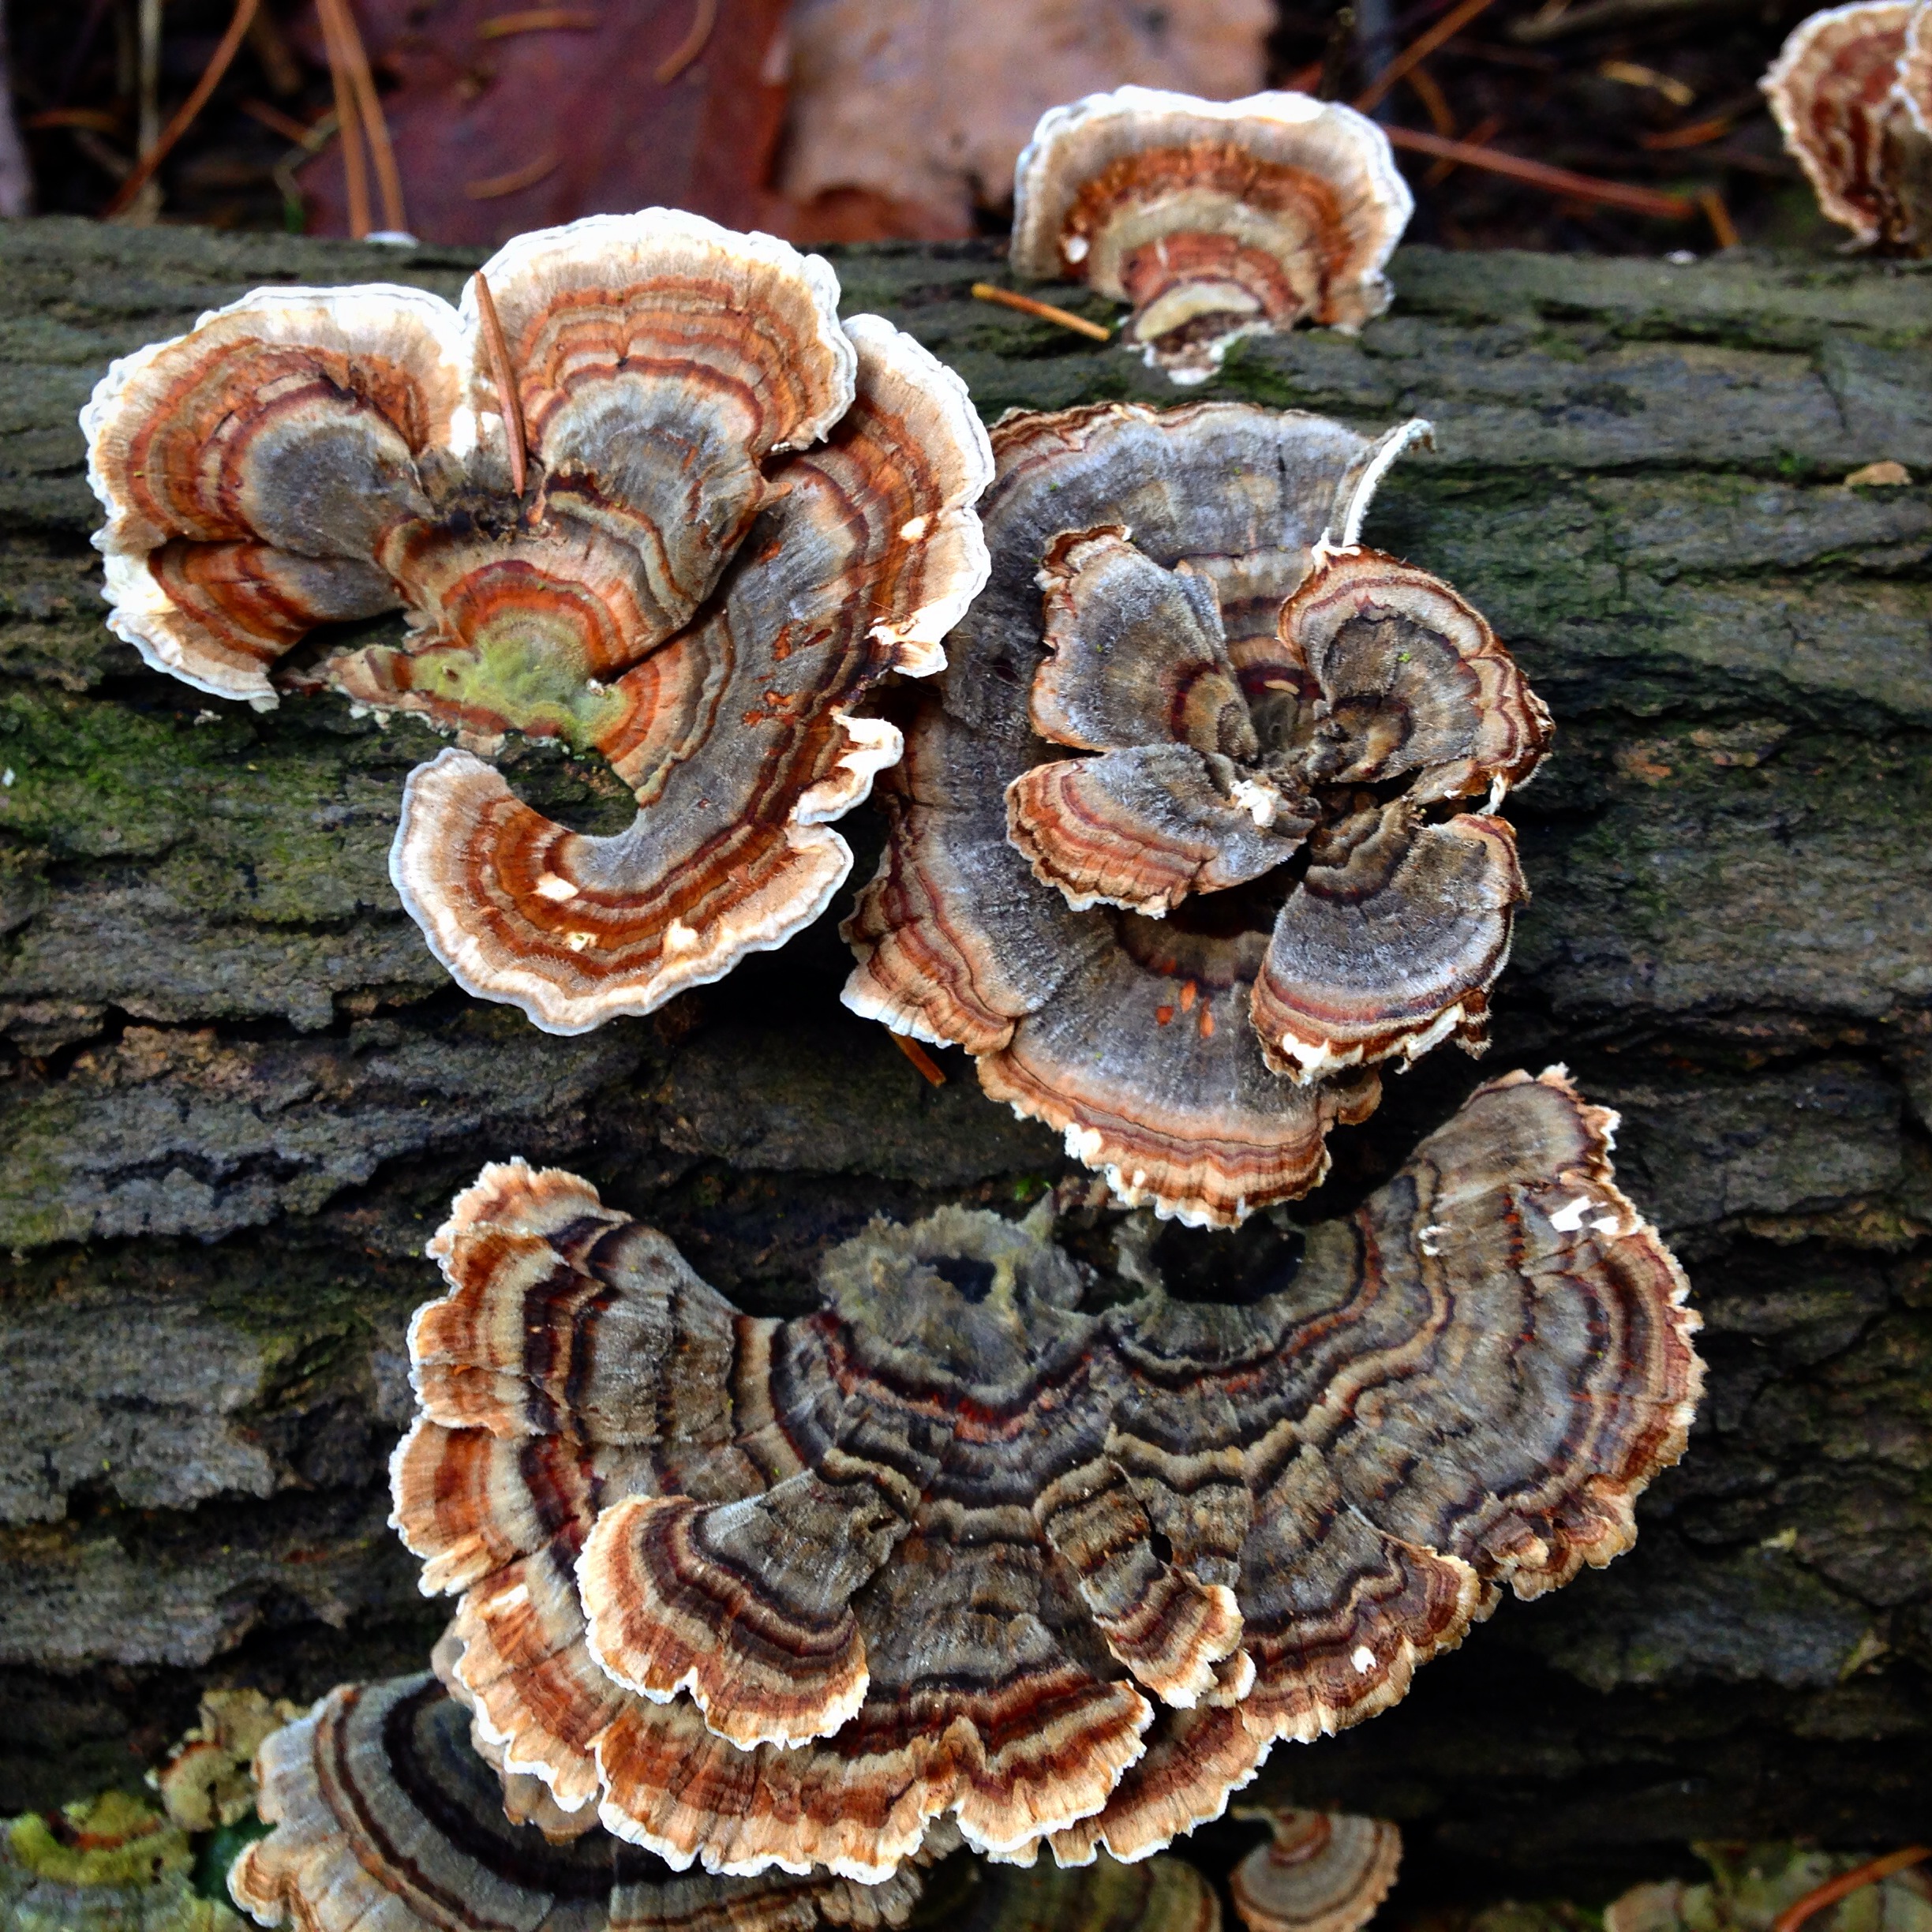 Turkey tail fungi: Nature's recycling enthusiasts | The St. Lawrence ...